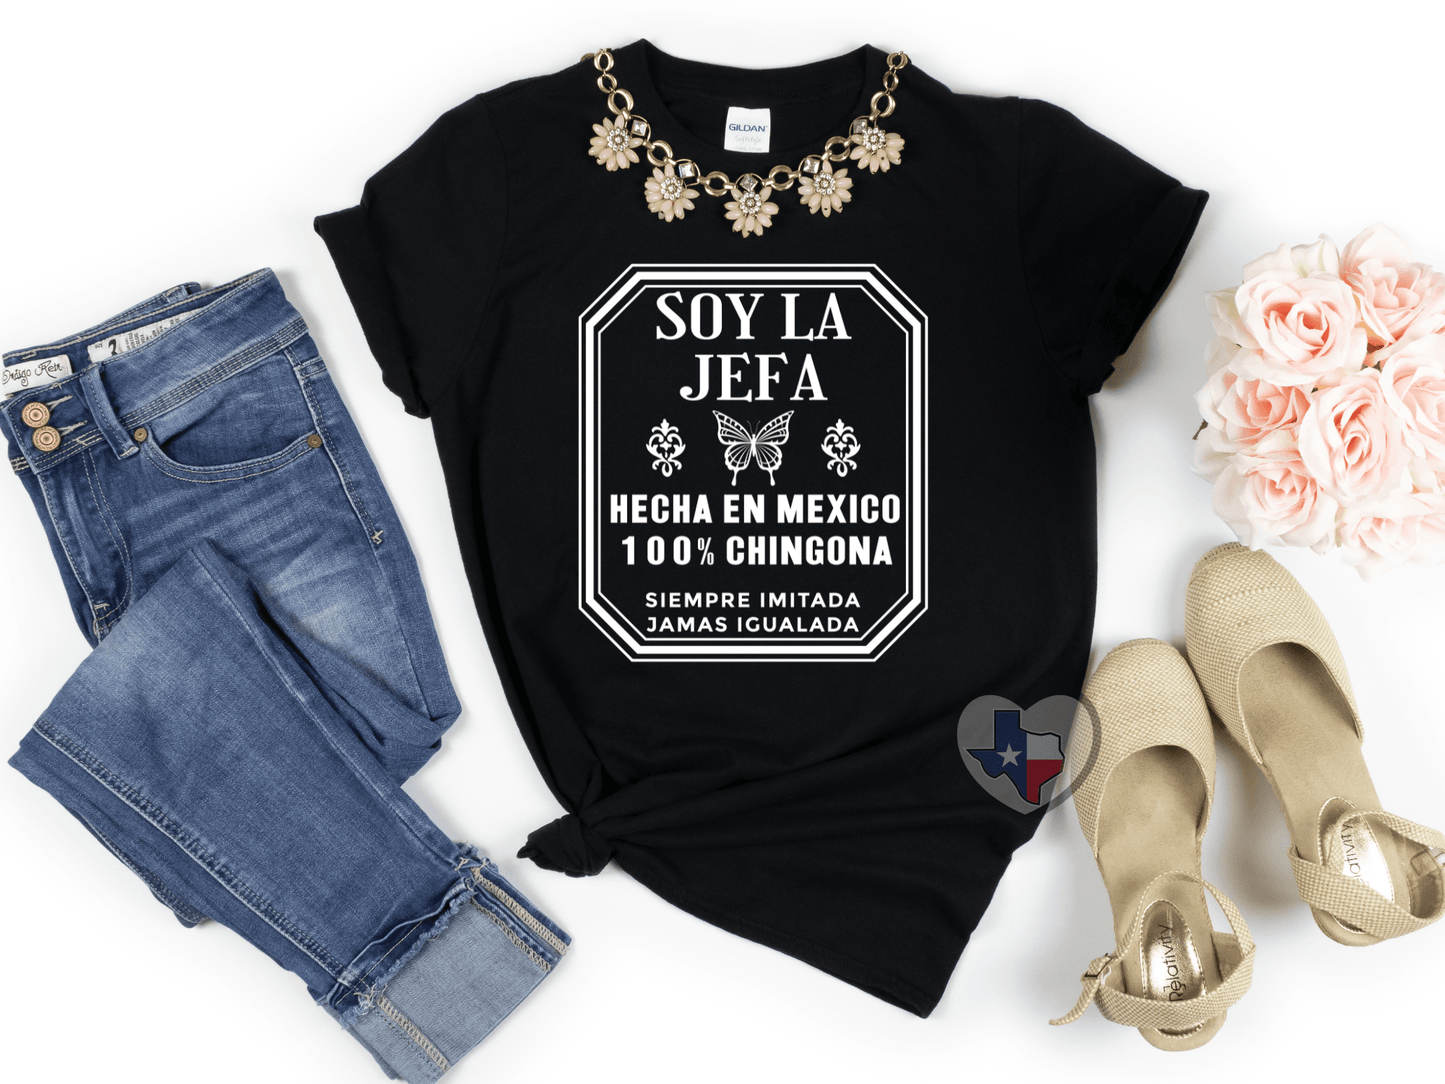 PRE-ORDER Arriving 8/26 Soy La Jefa - Texas Transfers and Designs